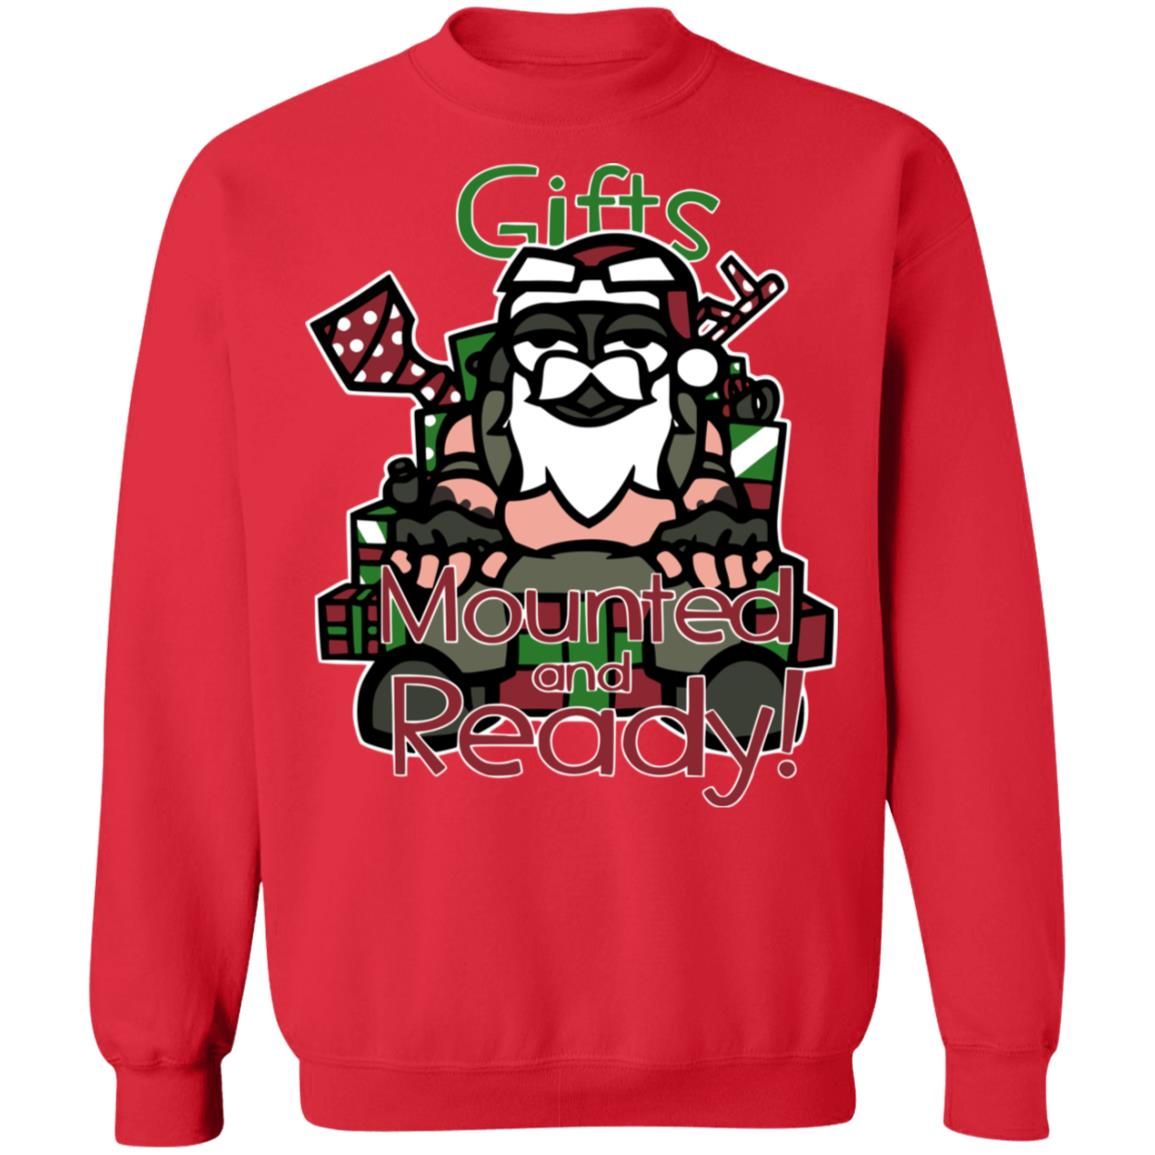 Mounted And Ready!  Car Gift Christmas Sweatshirt Style: Sweatshirt, Color: Red